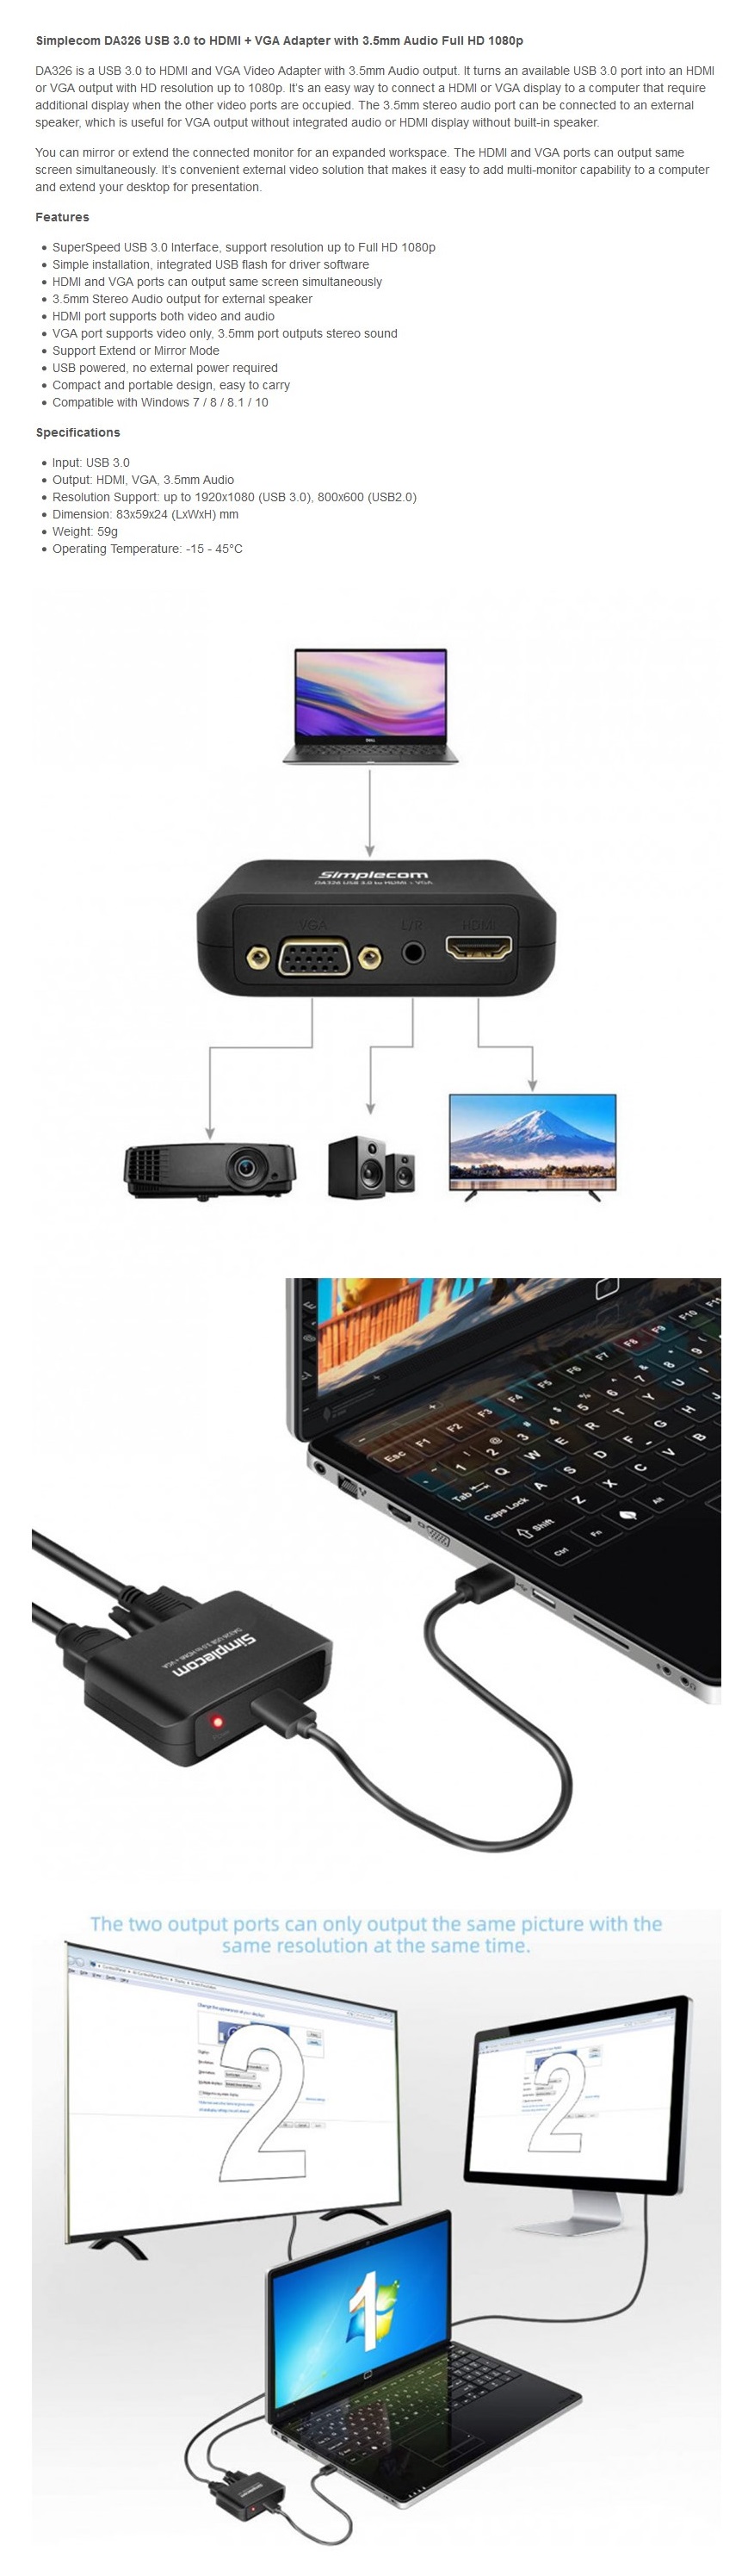 A large marketing image providing additional information about the product Simplecom DA326 USB 3.0 Type-A to HDMI + VGA + 3.5mm Audio Adaptor - Additional alt info not provided